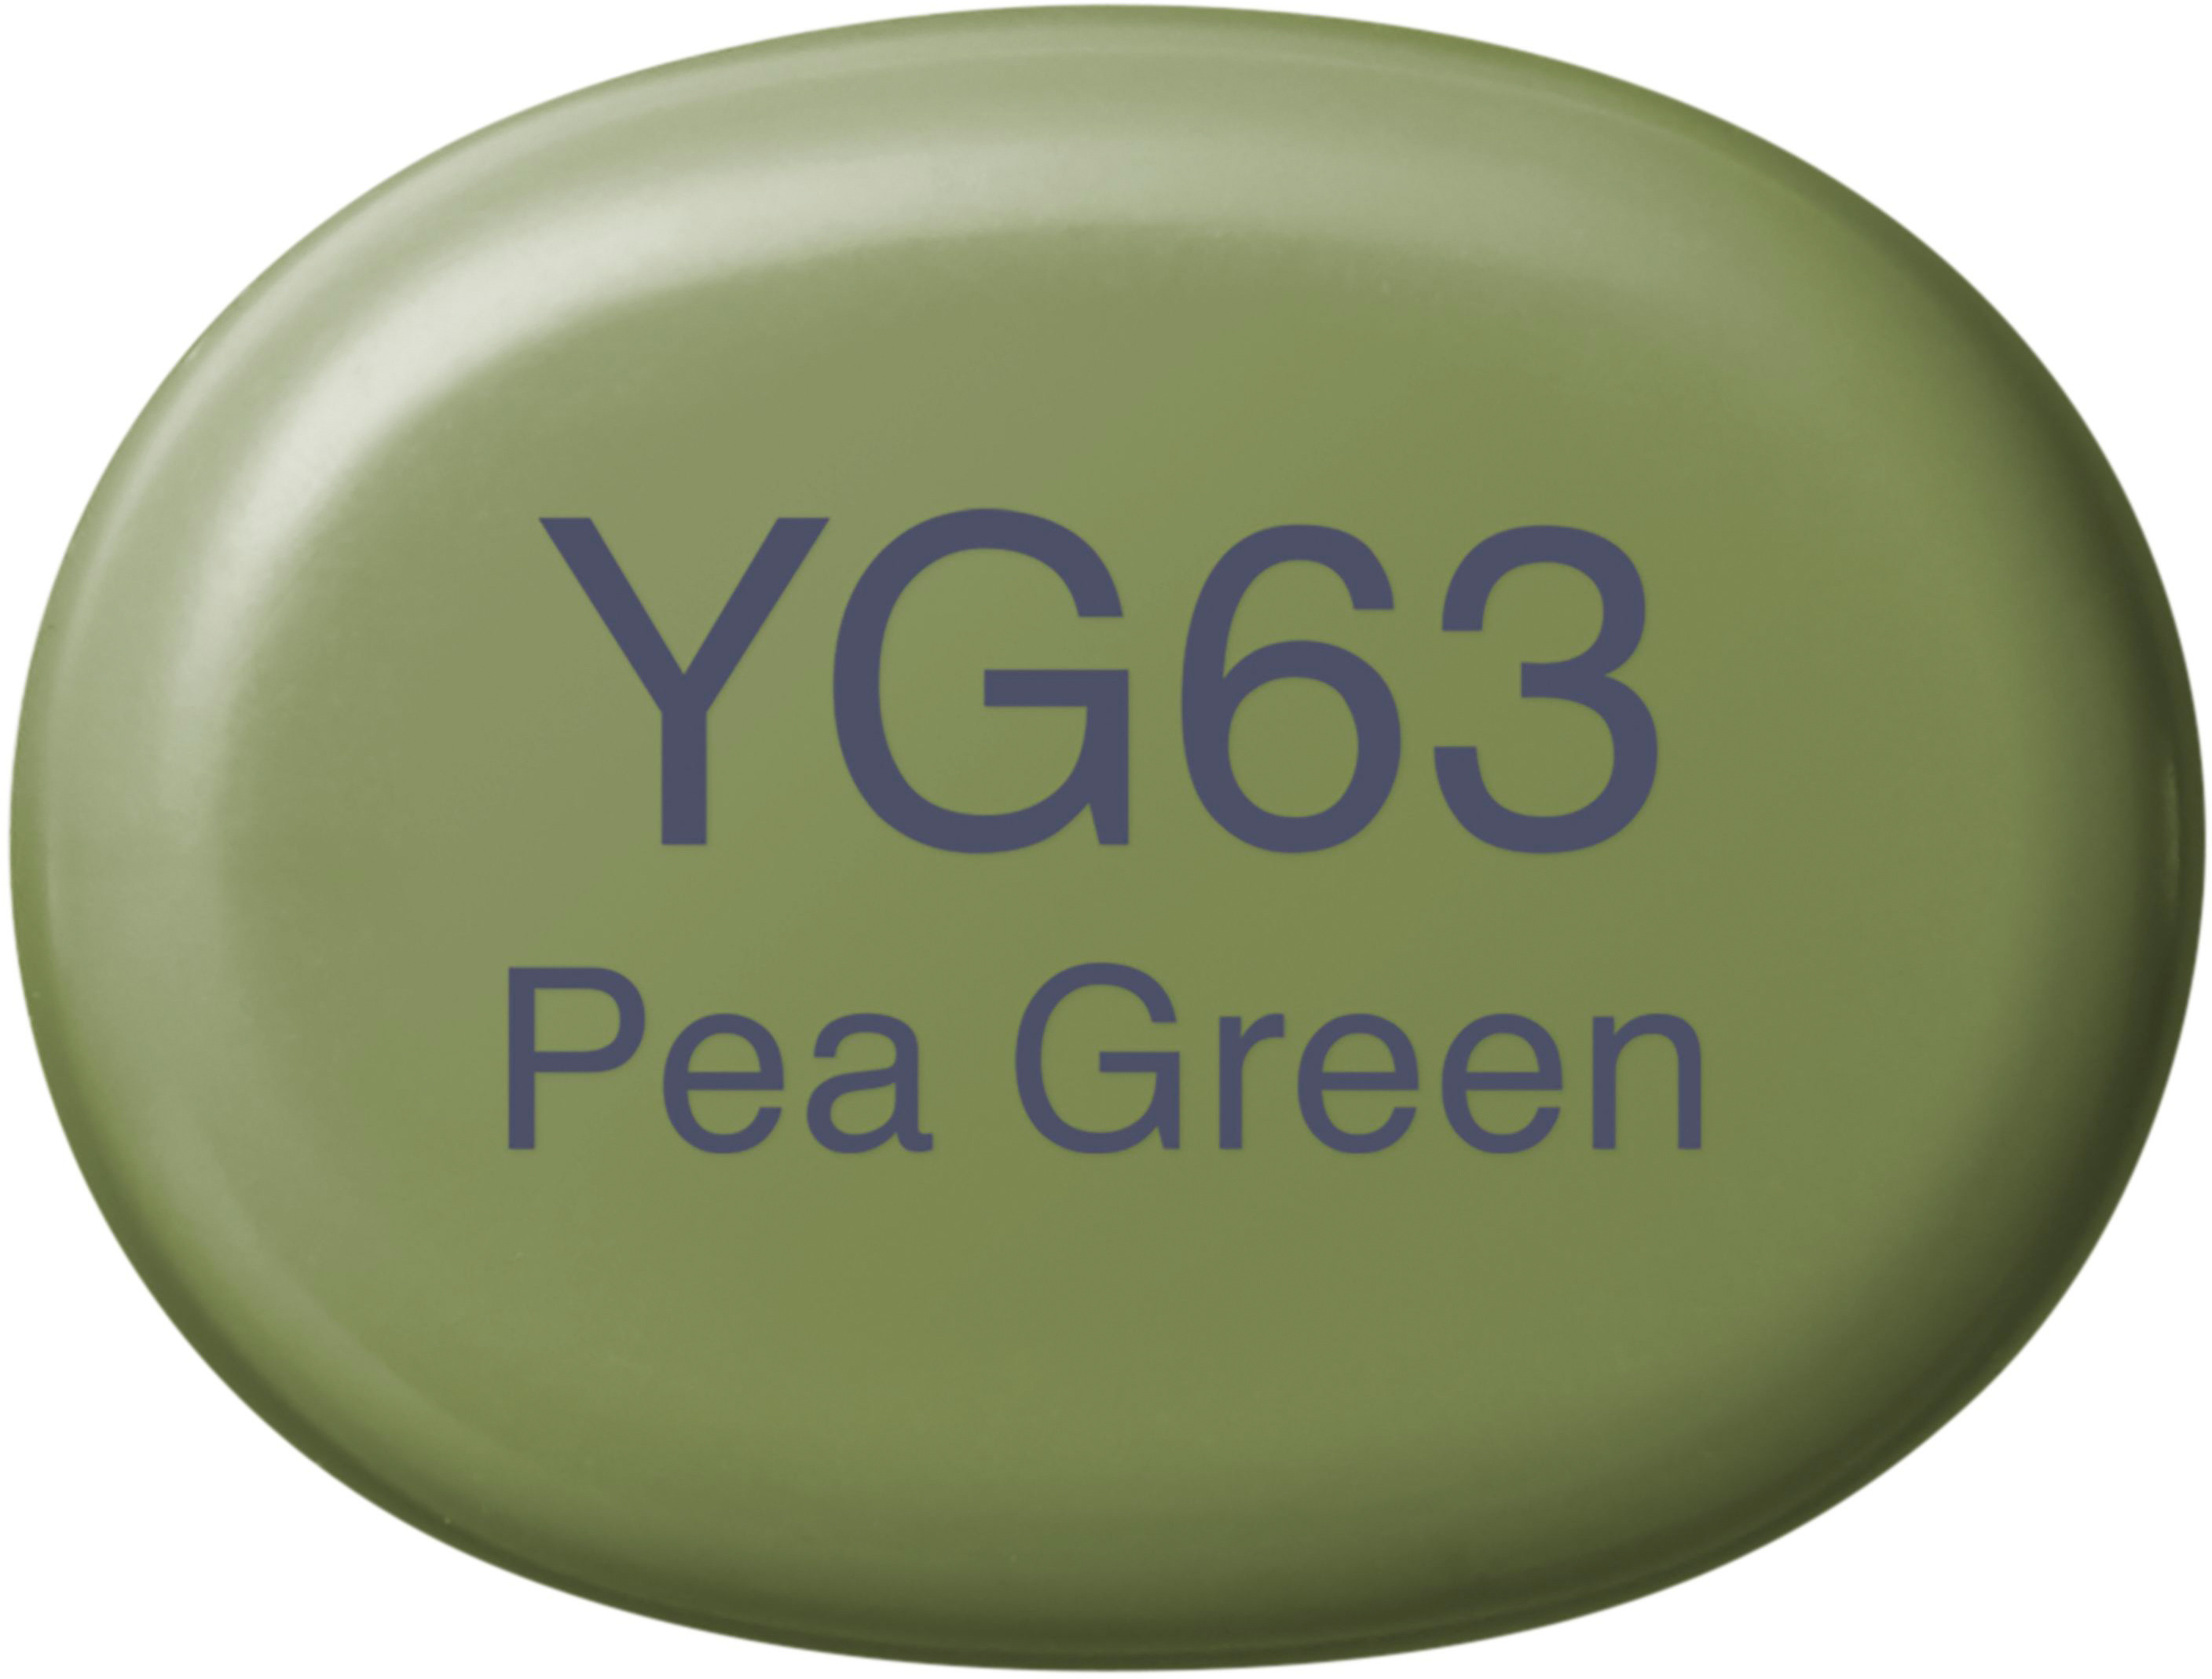 COPIC Marker Sketch 21075204 YG63 - Pea Green